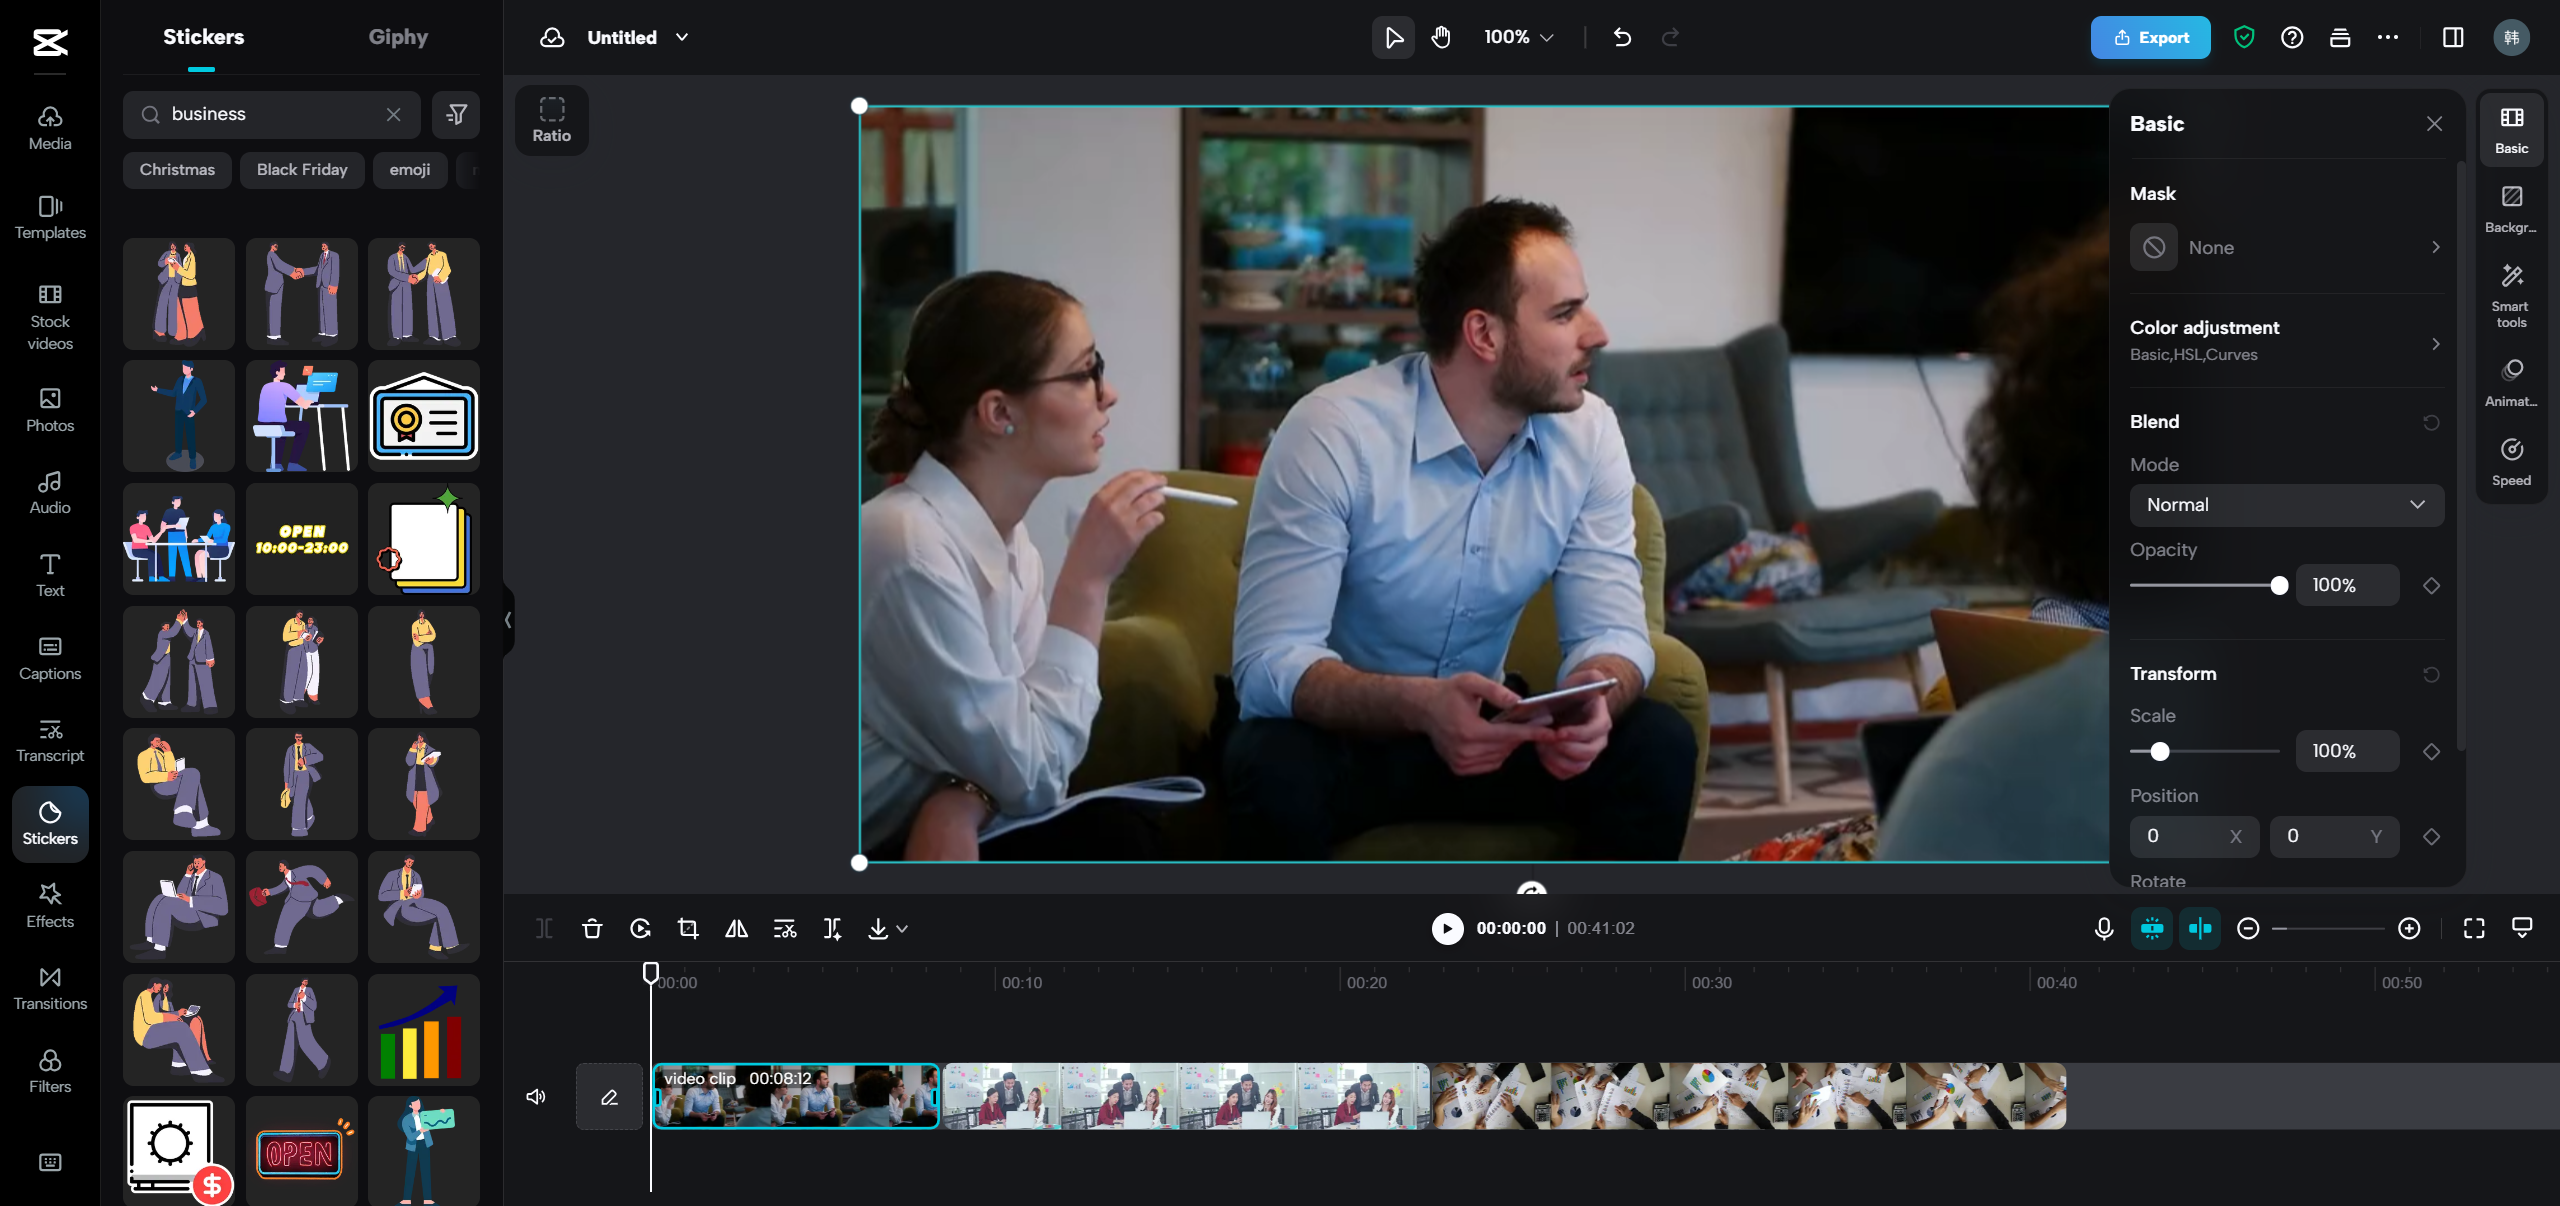 CapCut - The Ultimate Video Editing Software for SMBs and SMEs